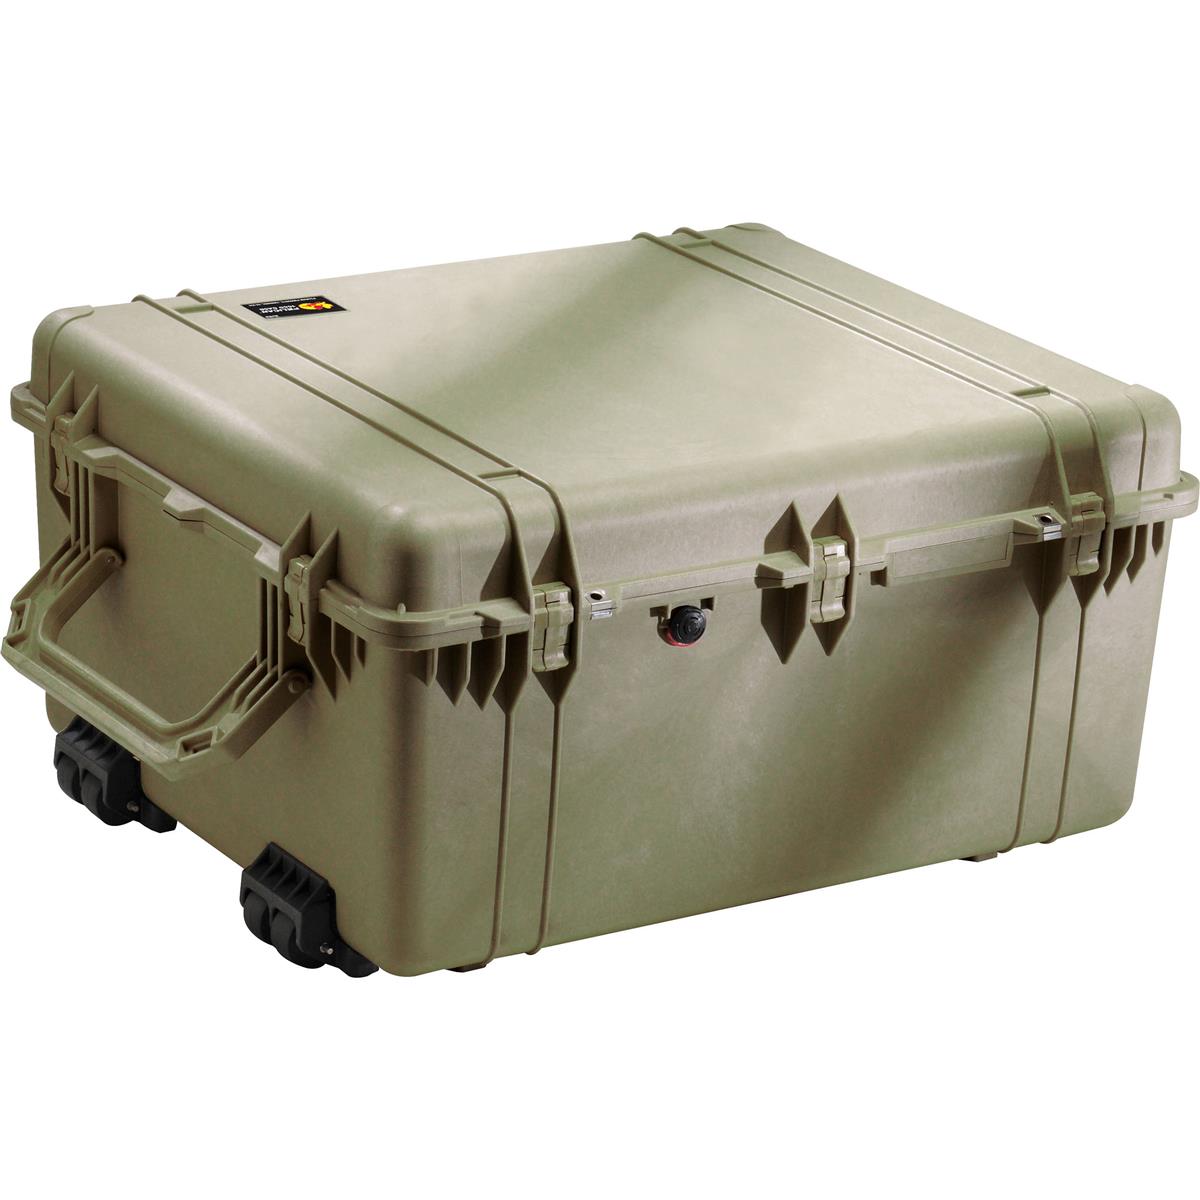 Pelican 1690 Watertight Hard Case with Cubed Foam & Wheels - Olive Drab Green -  1690-000-130